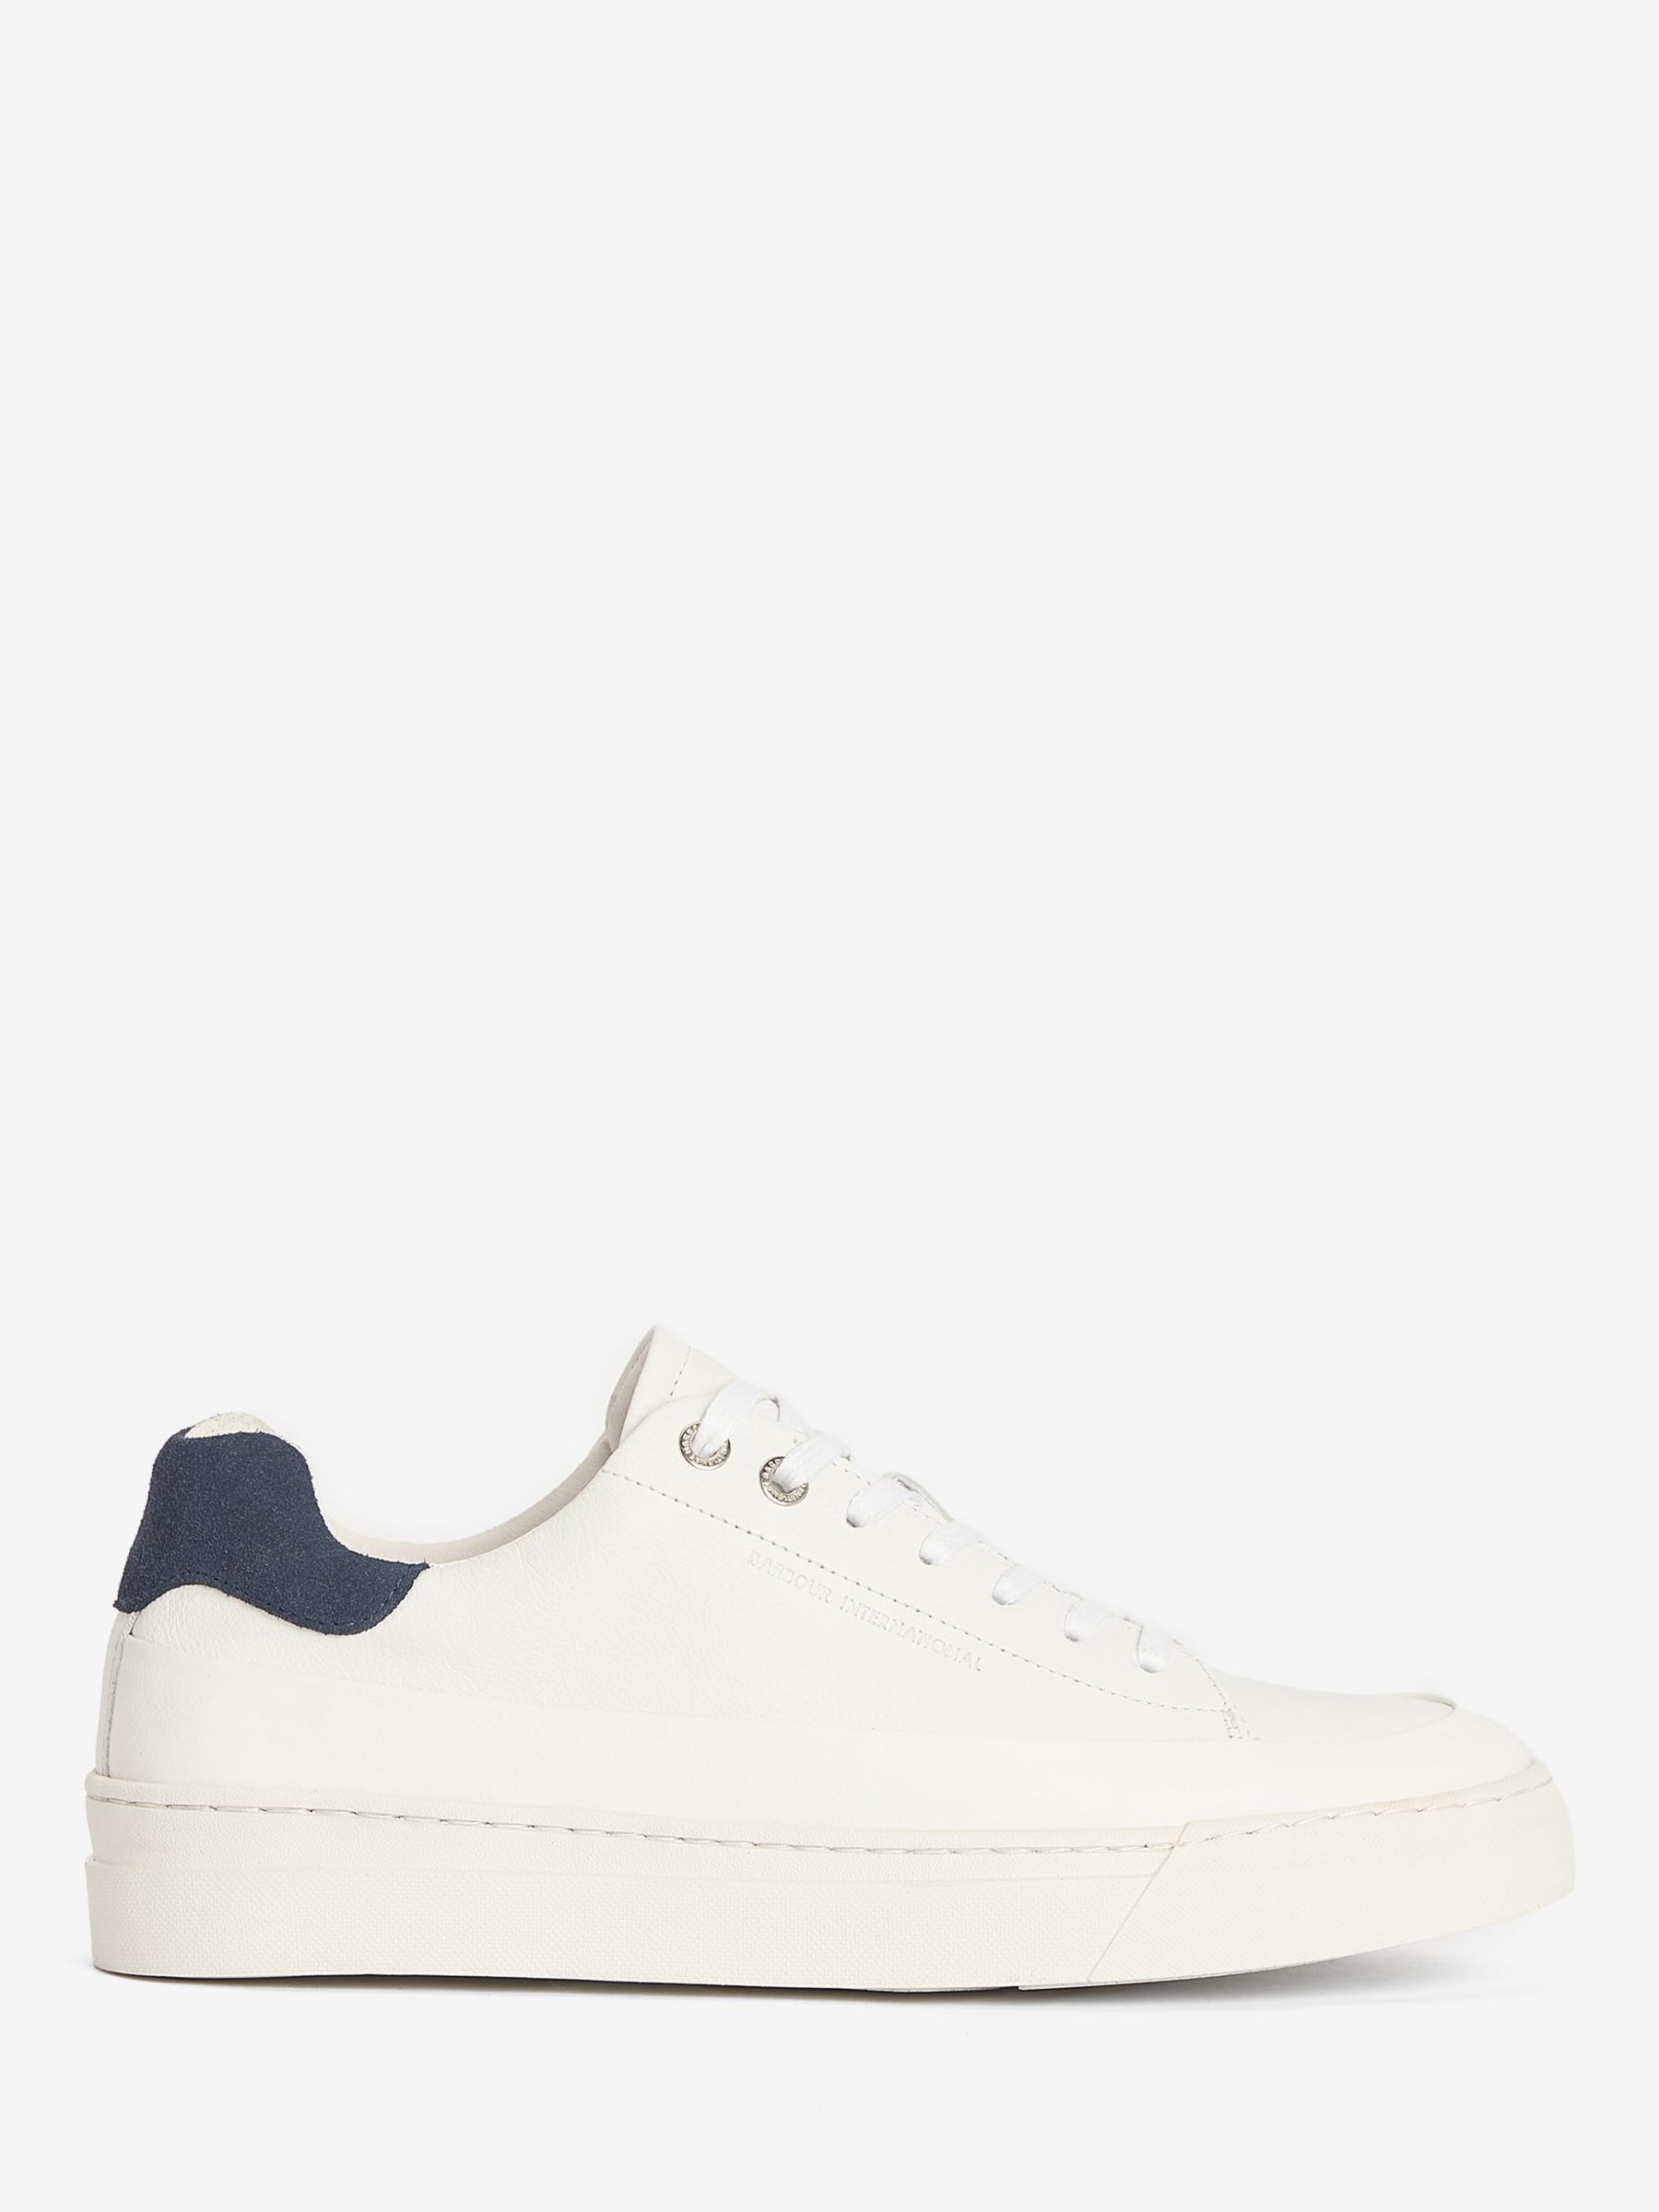 Barbour International Cram Cupsole Trainers, White at John Lewis & Partners